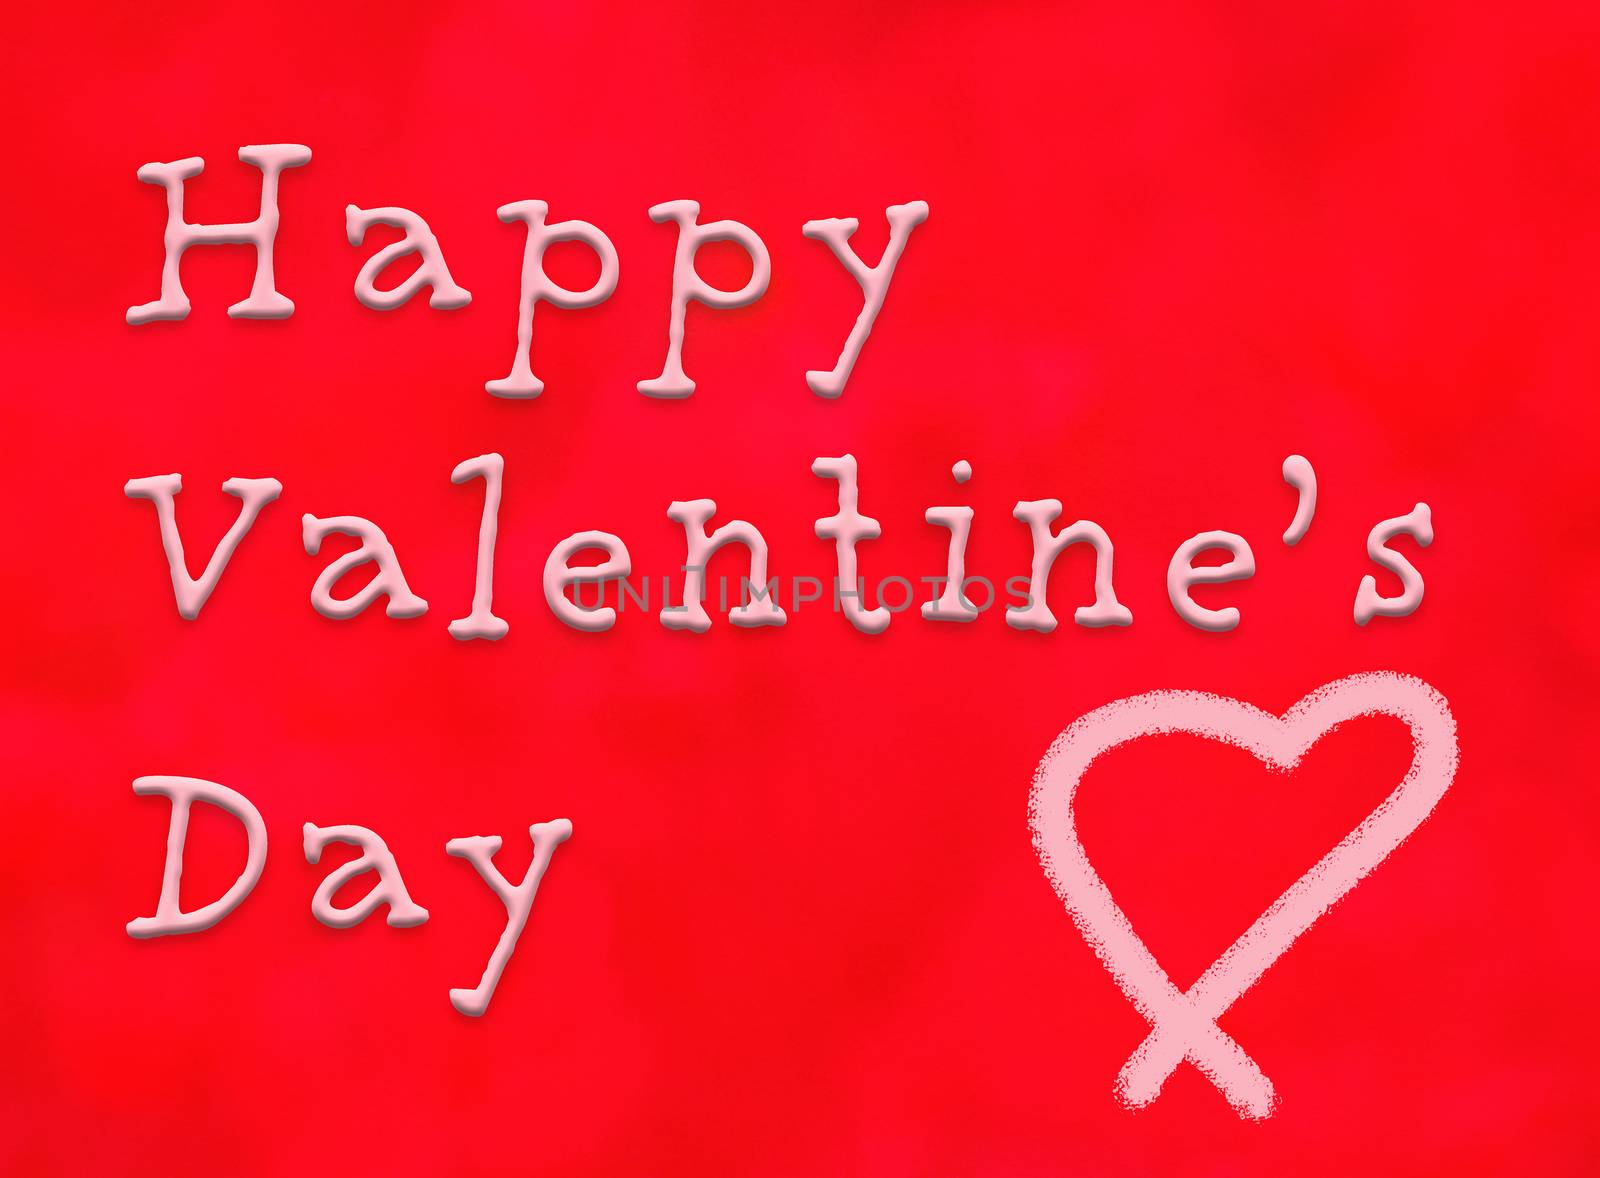 Happy's Valentine's Day Text On Red Background by 	JacksonStock